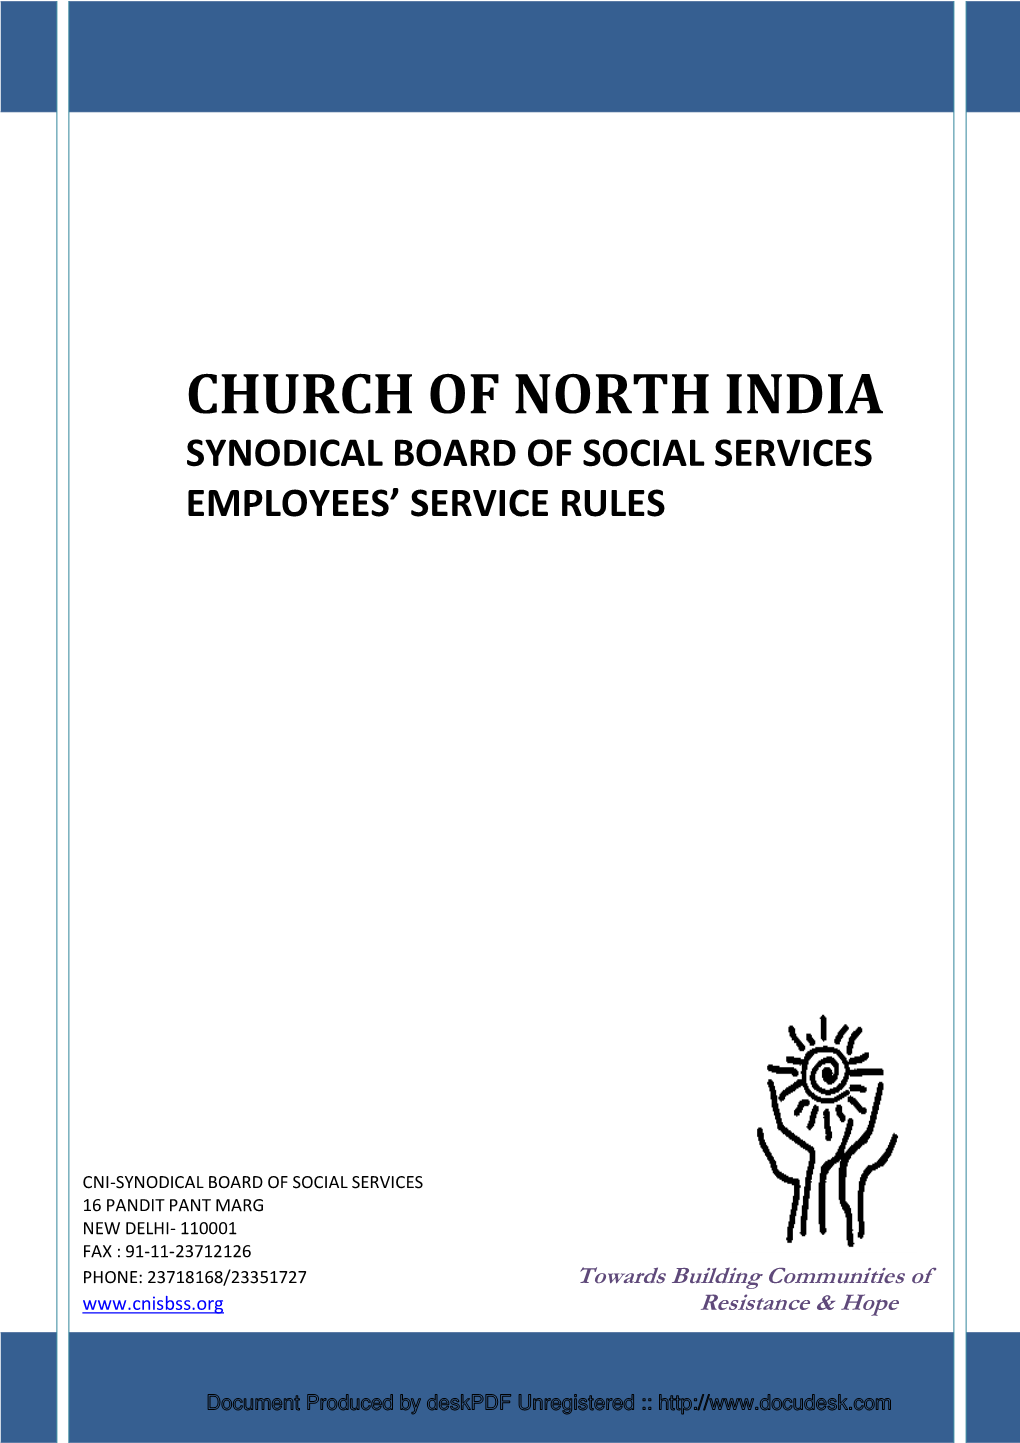 Church of North India Synodical Board of Social Services Employees’ Service Rules